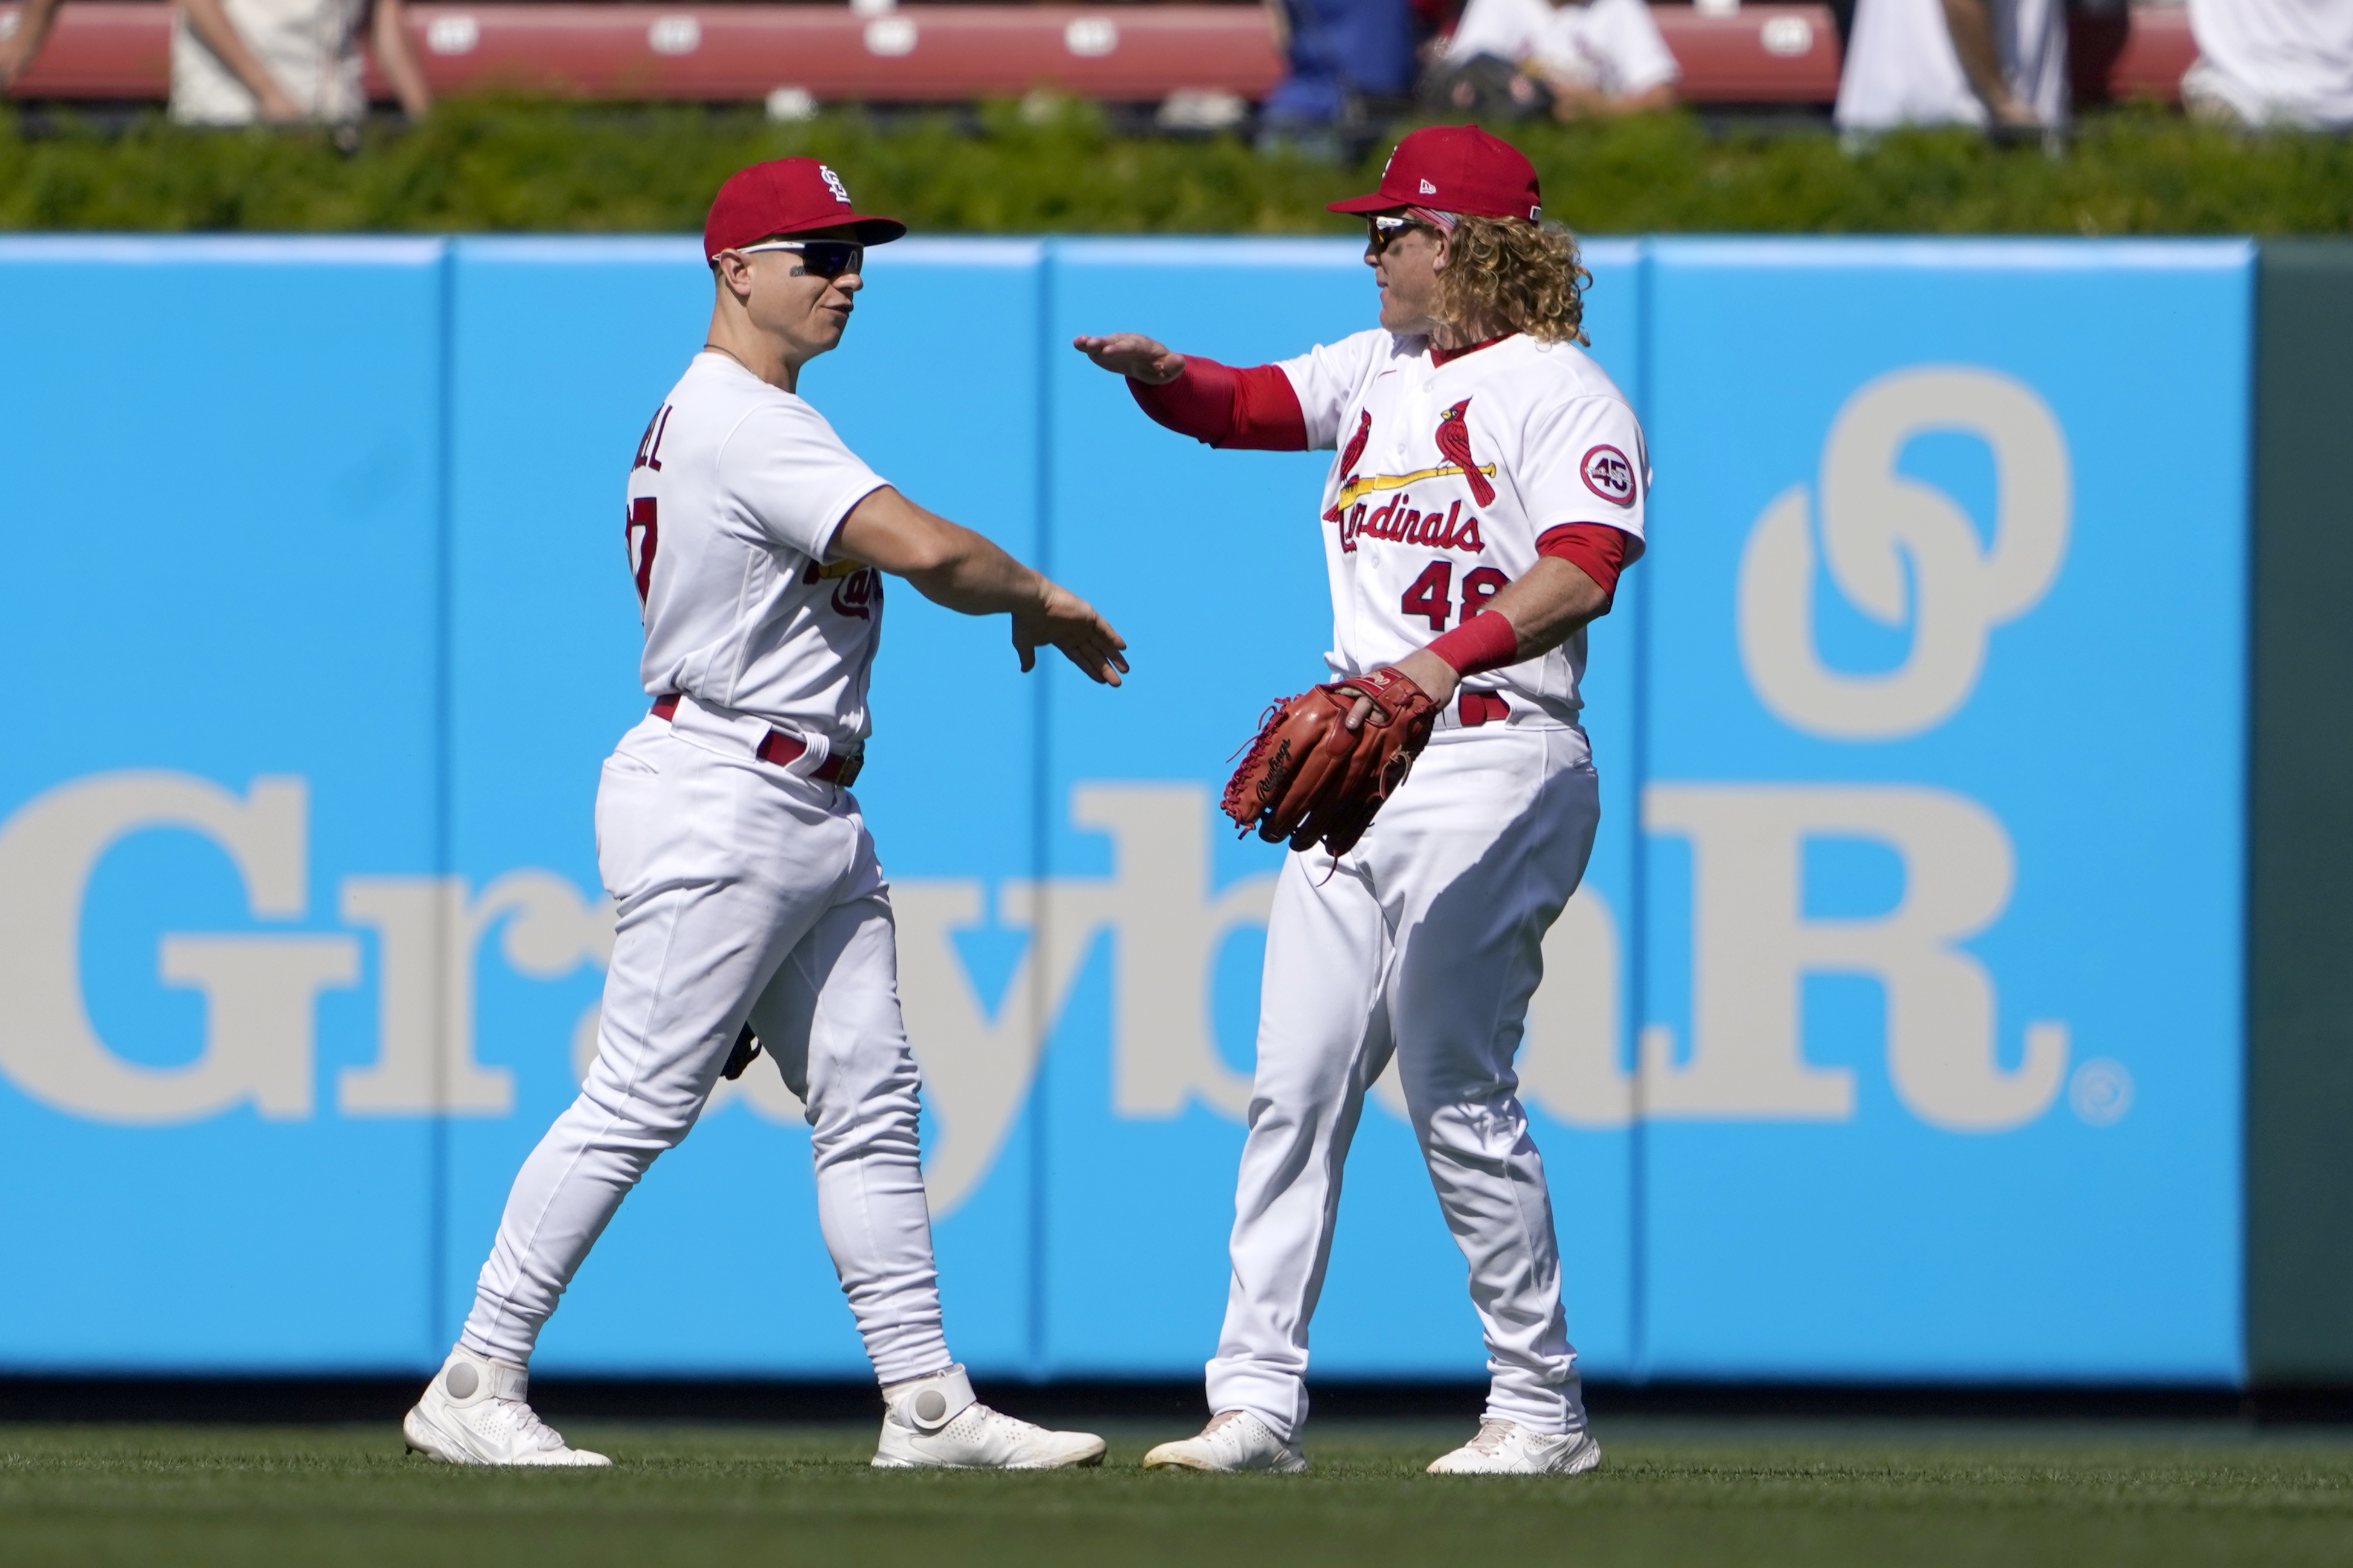 O'Neill's homer in 10th lifts Cardinals over Giants 5-4